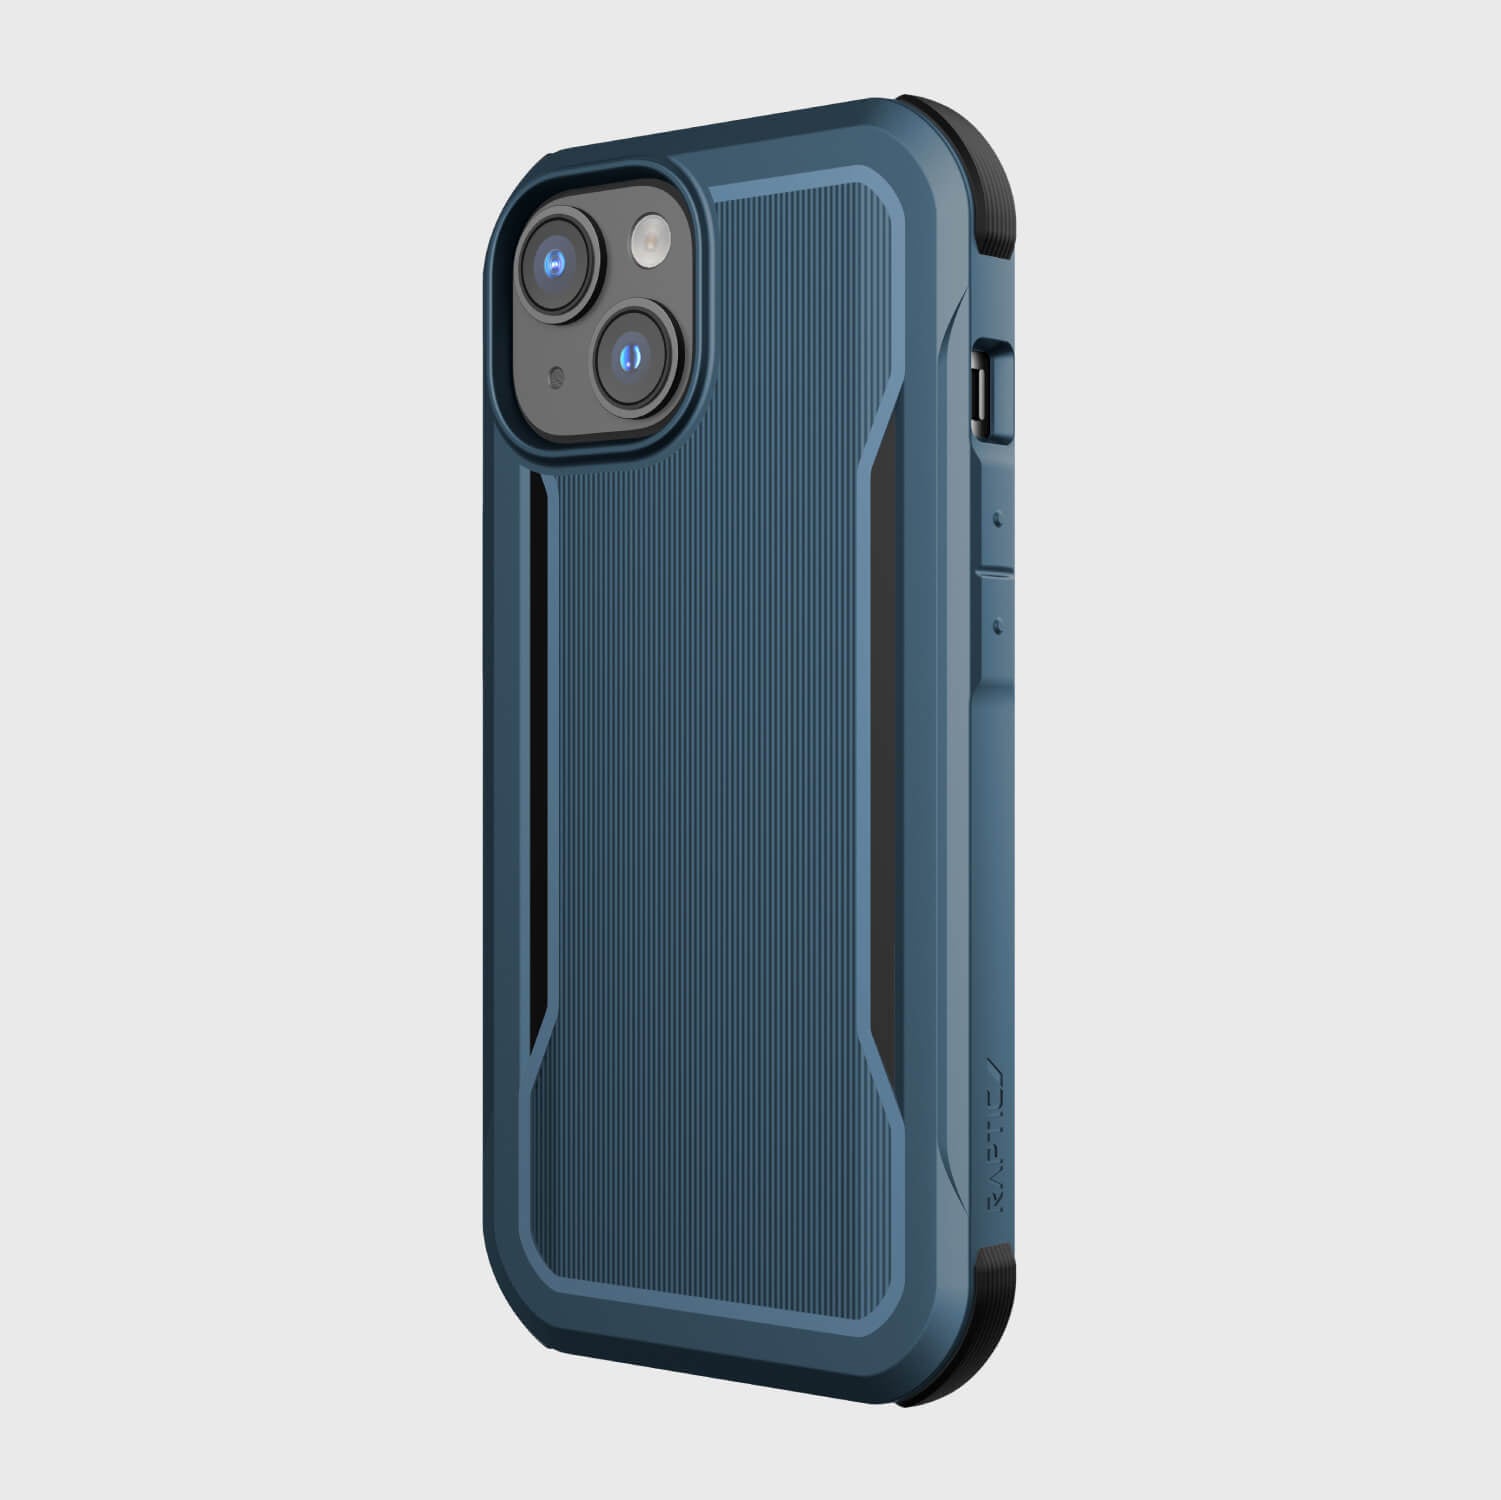 The Raptic iPhone 14 Case - Fort Built for MagSafe in blue offers military-grade drop protection.